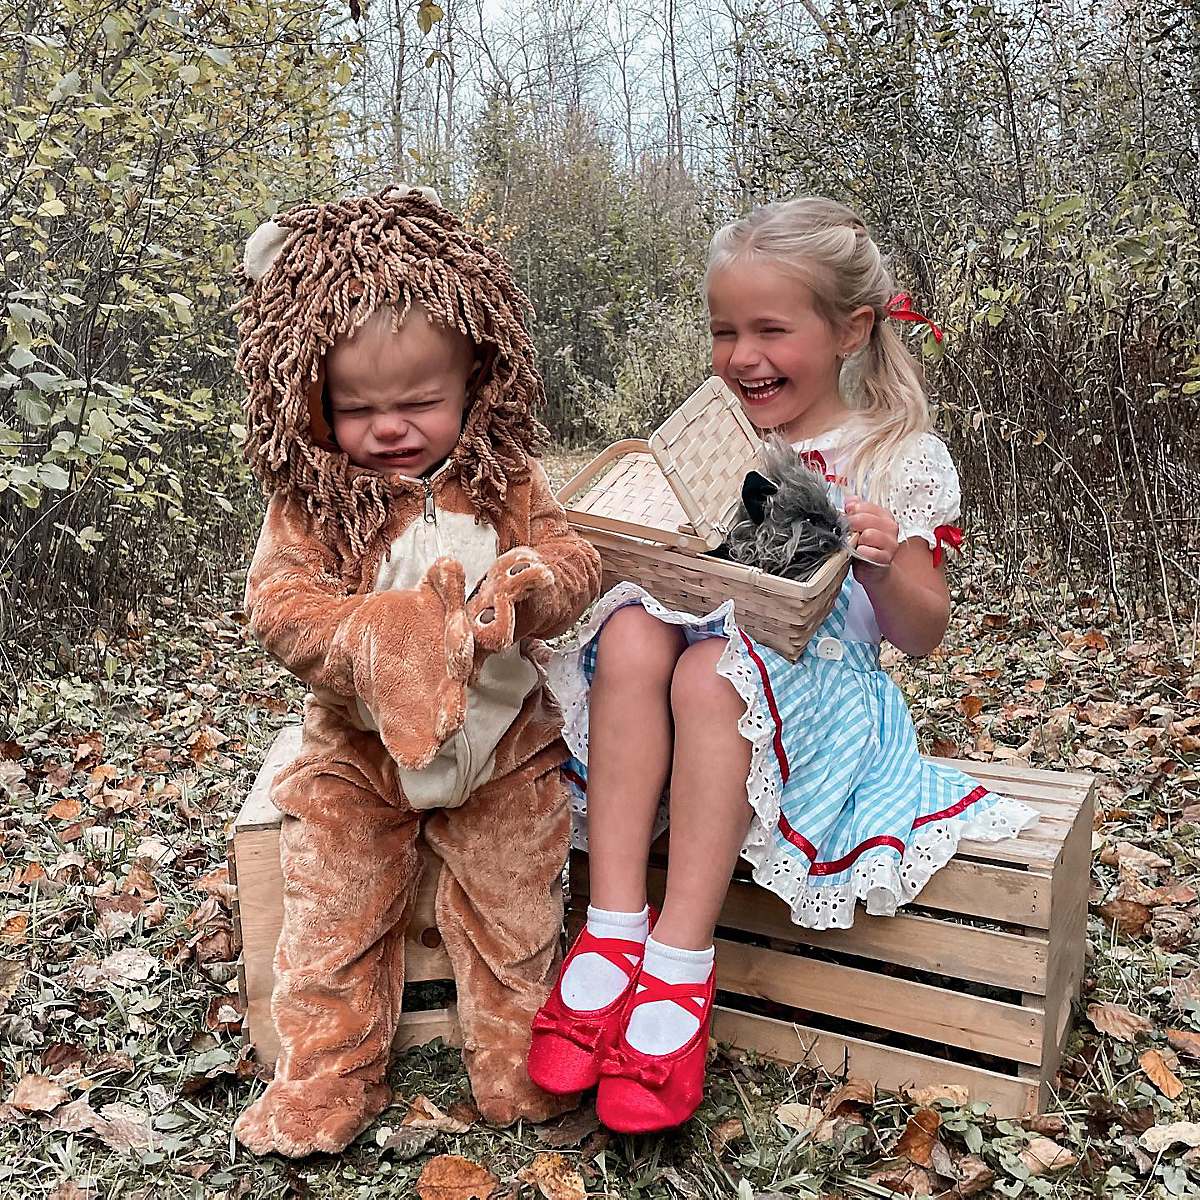 Kids in Halloween costume, one as a lion, one as Dorothy from The Wizard of Oz